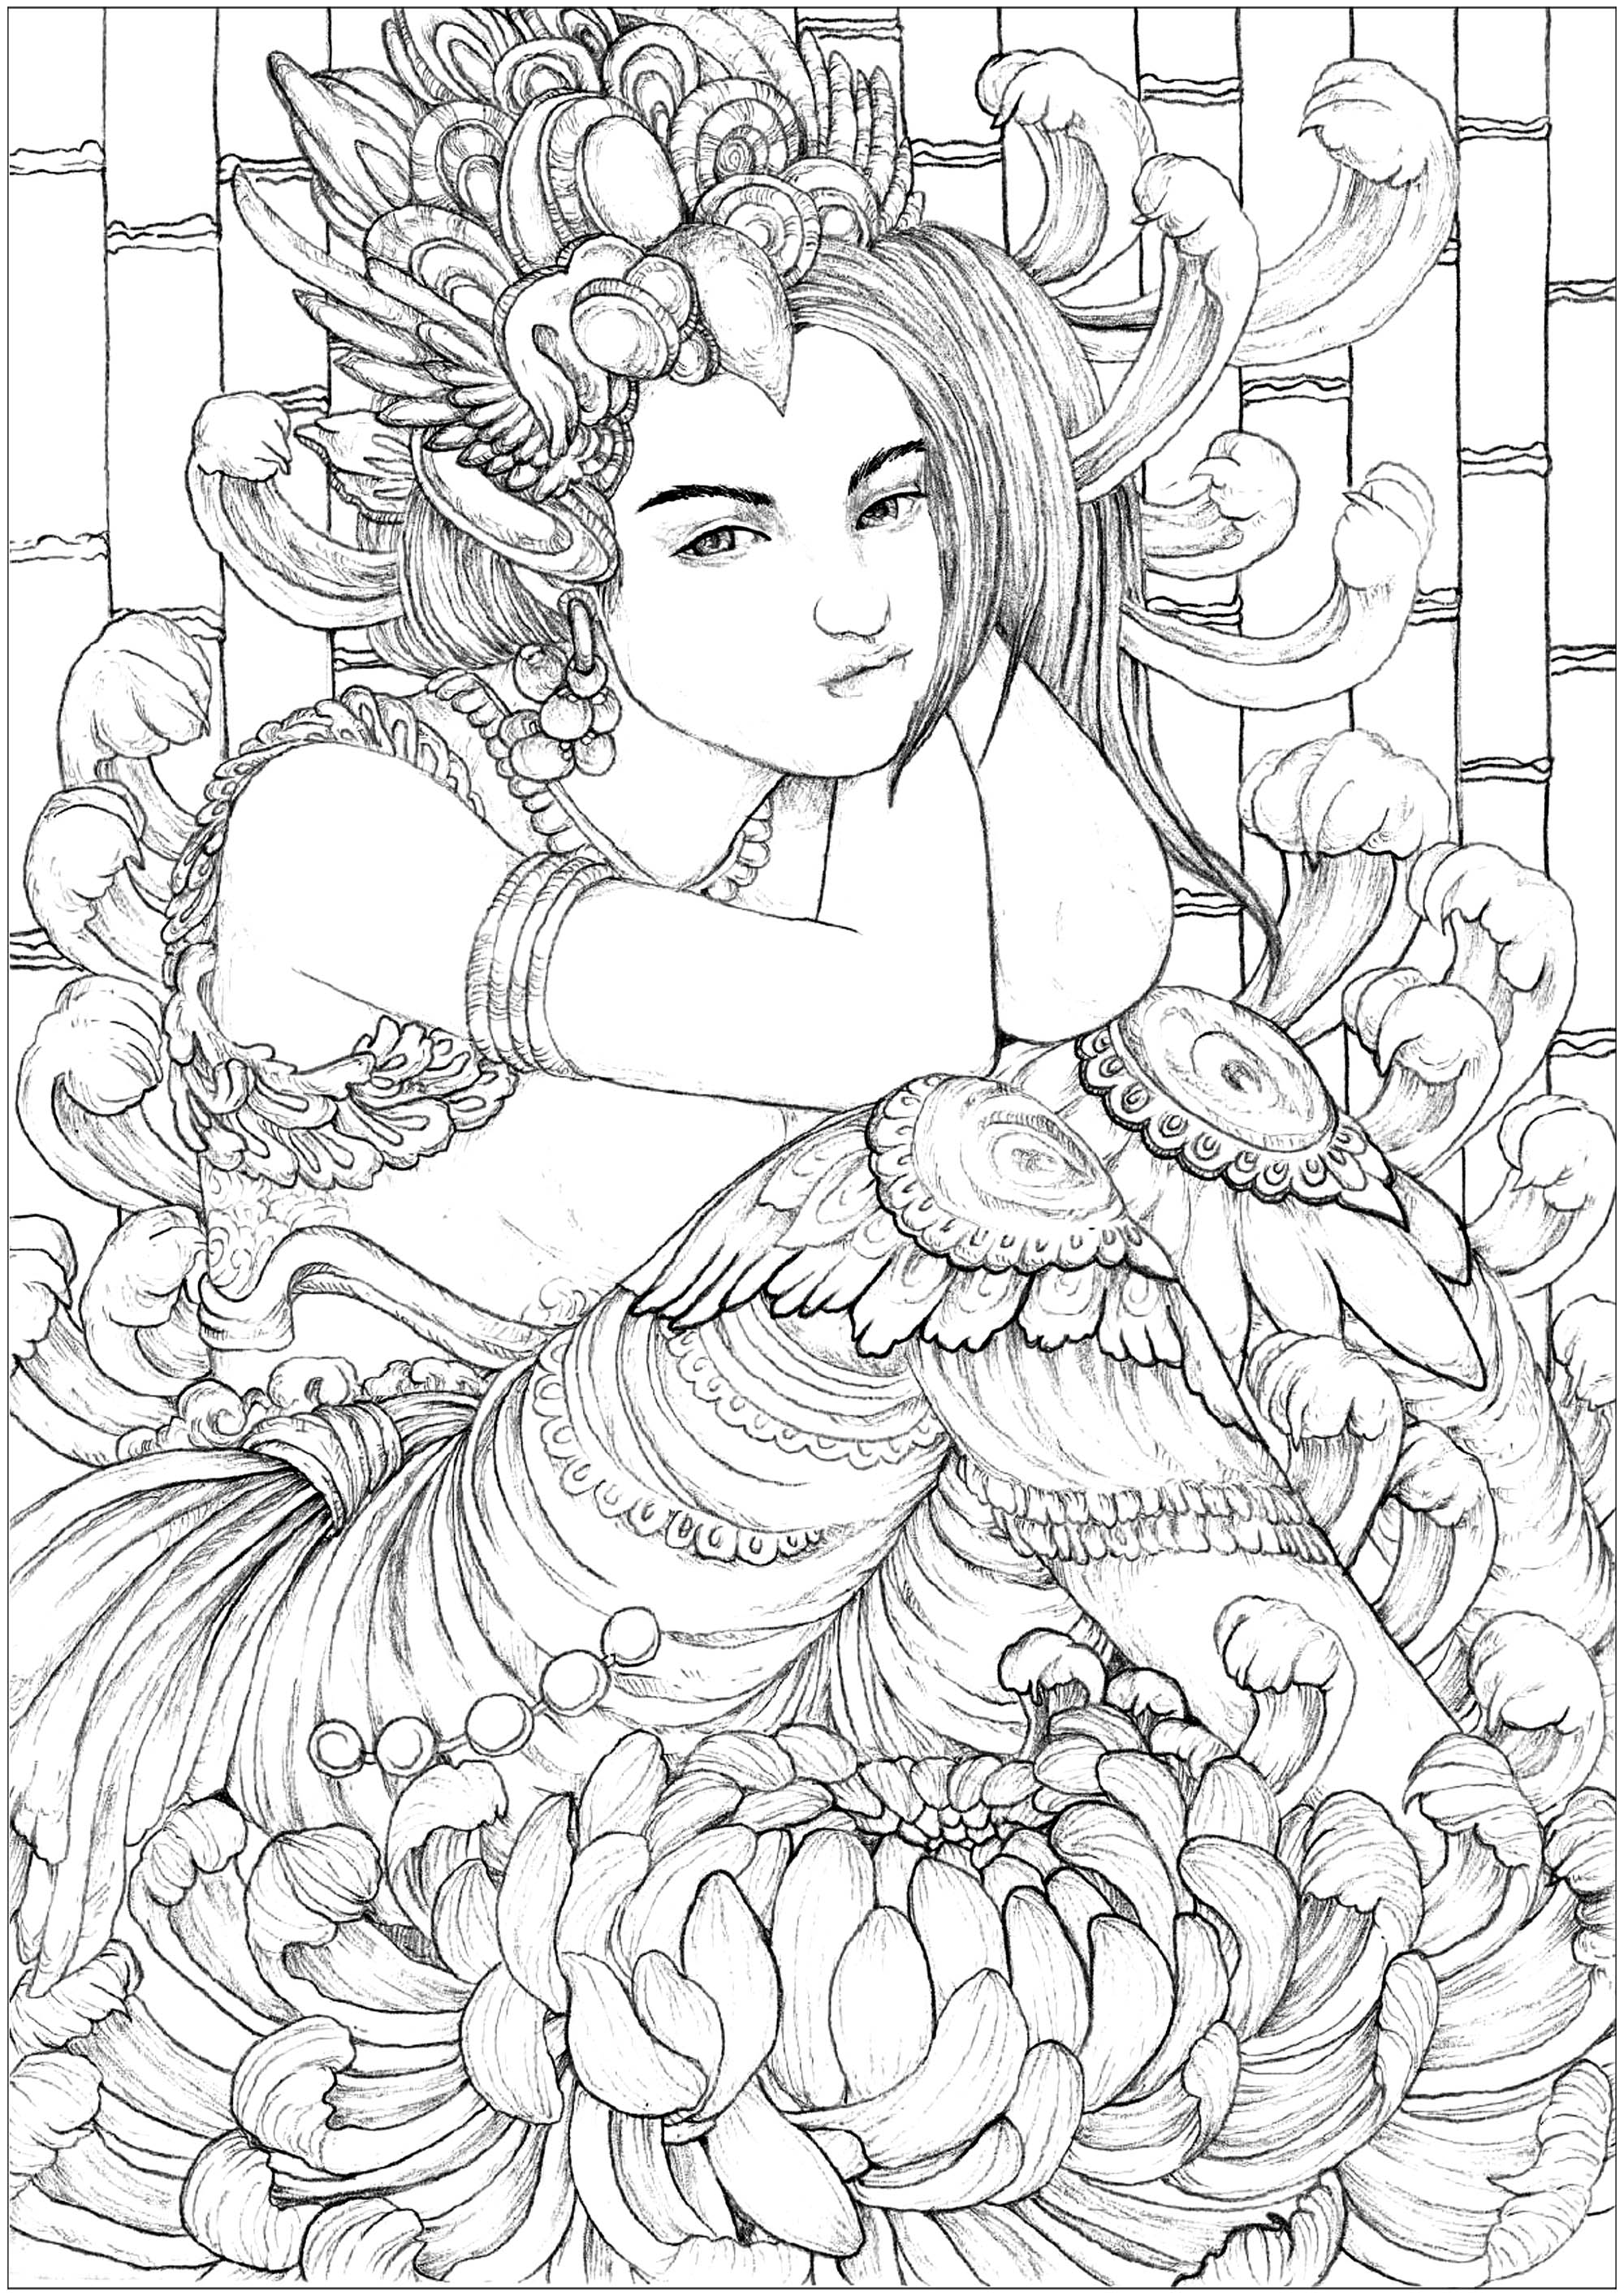 Download Hiwaga - Anti stress Adult Coloring Pages